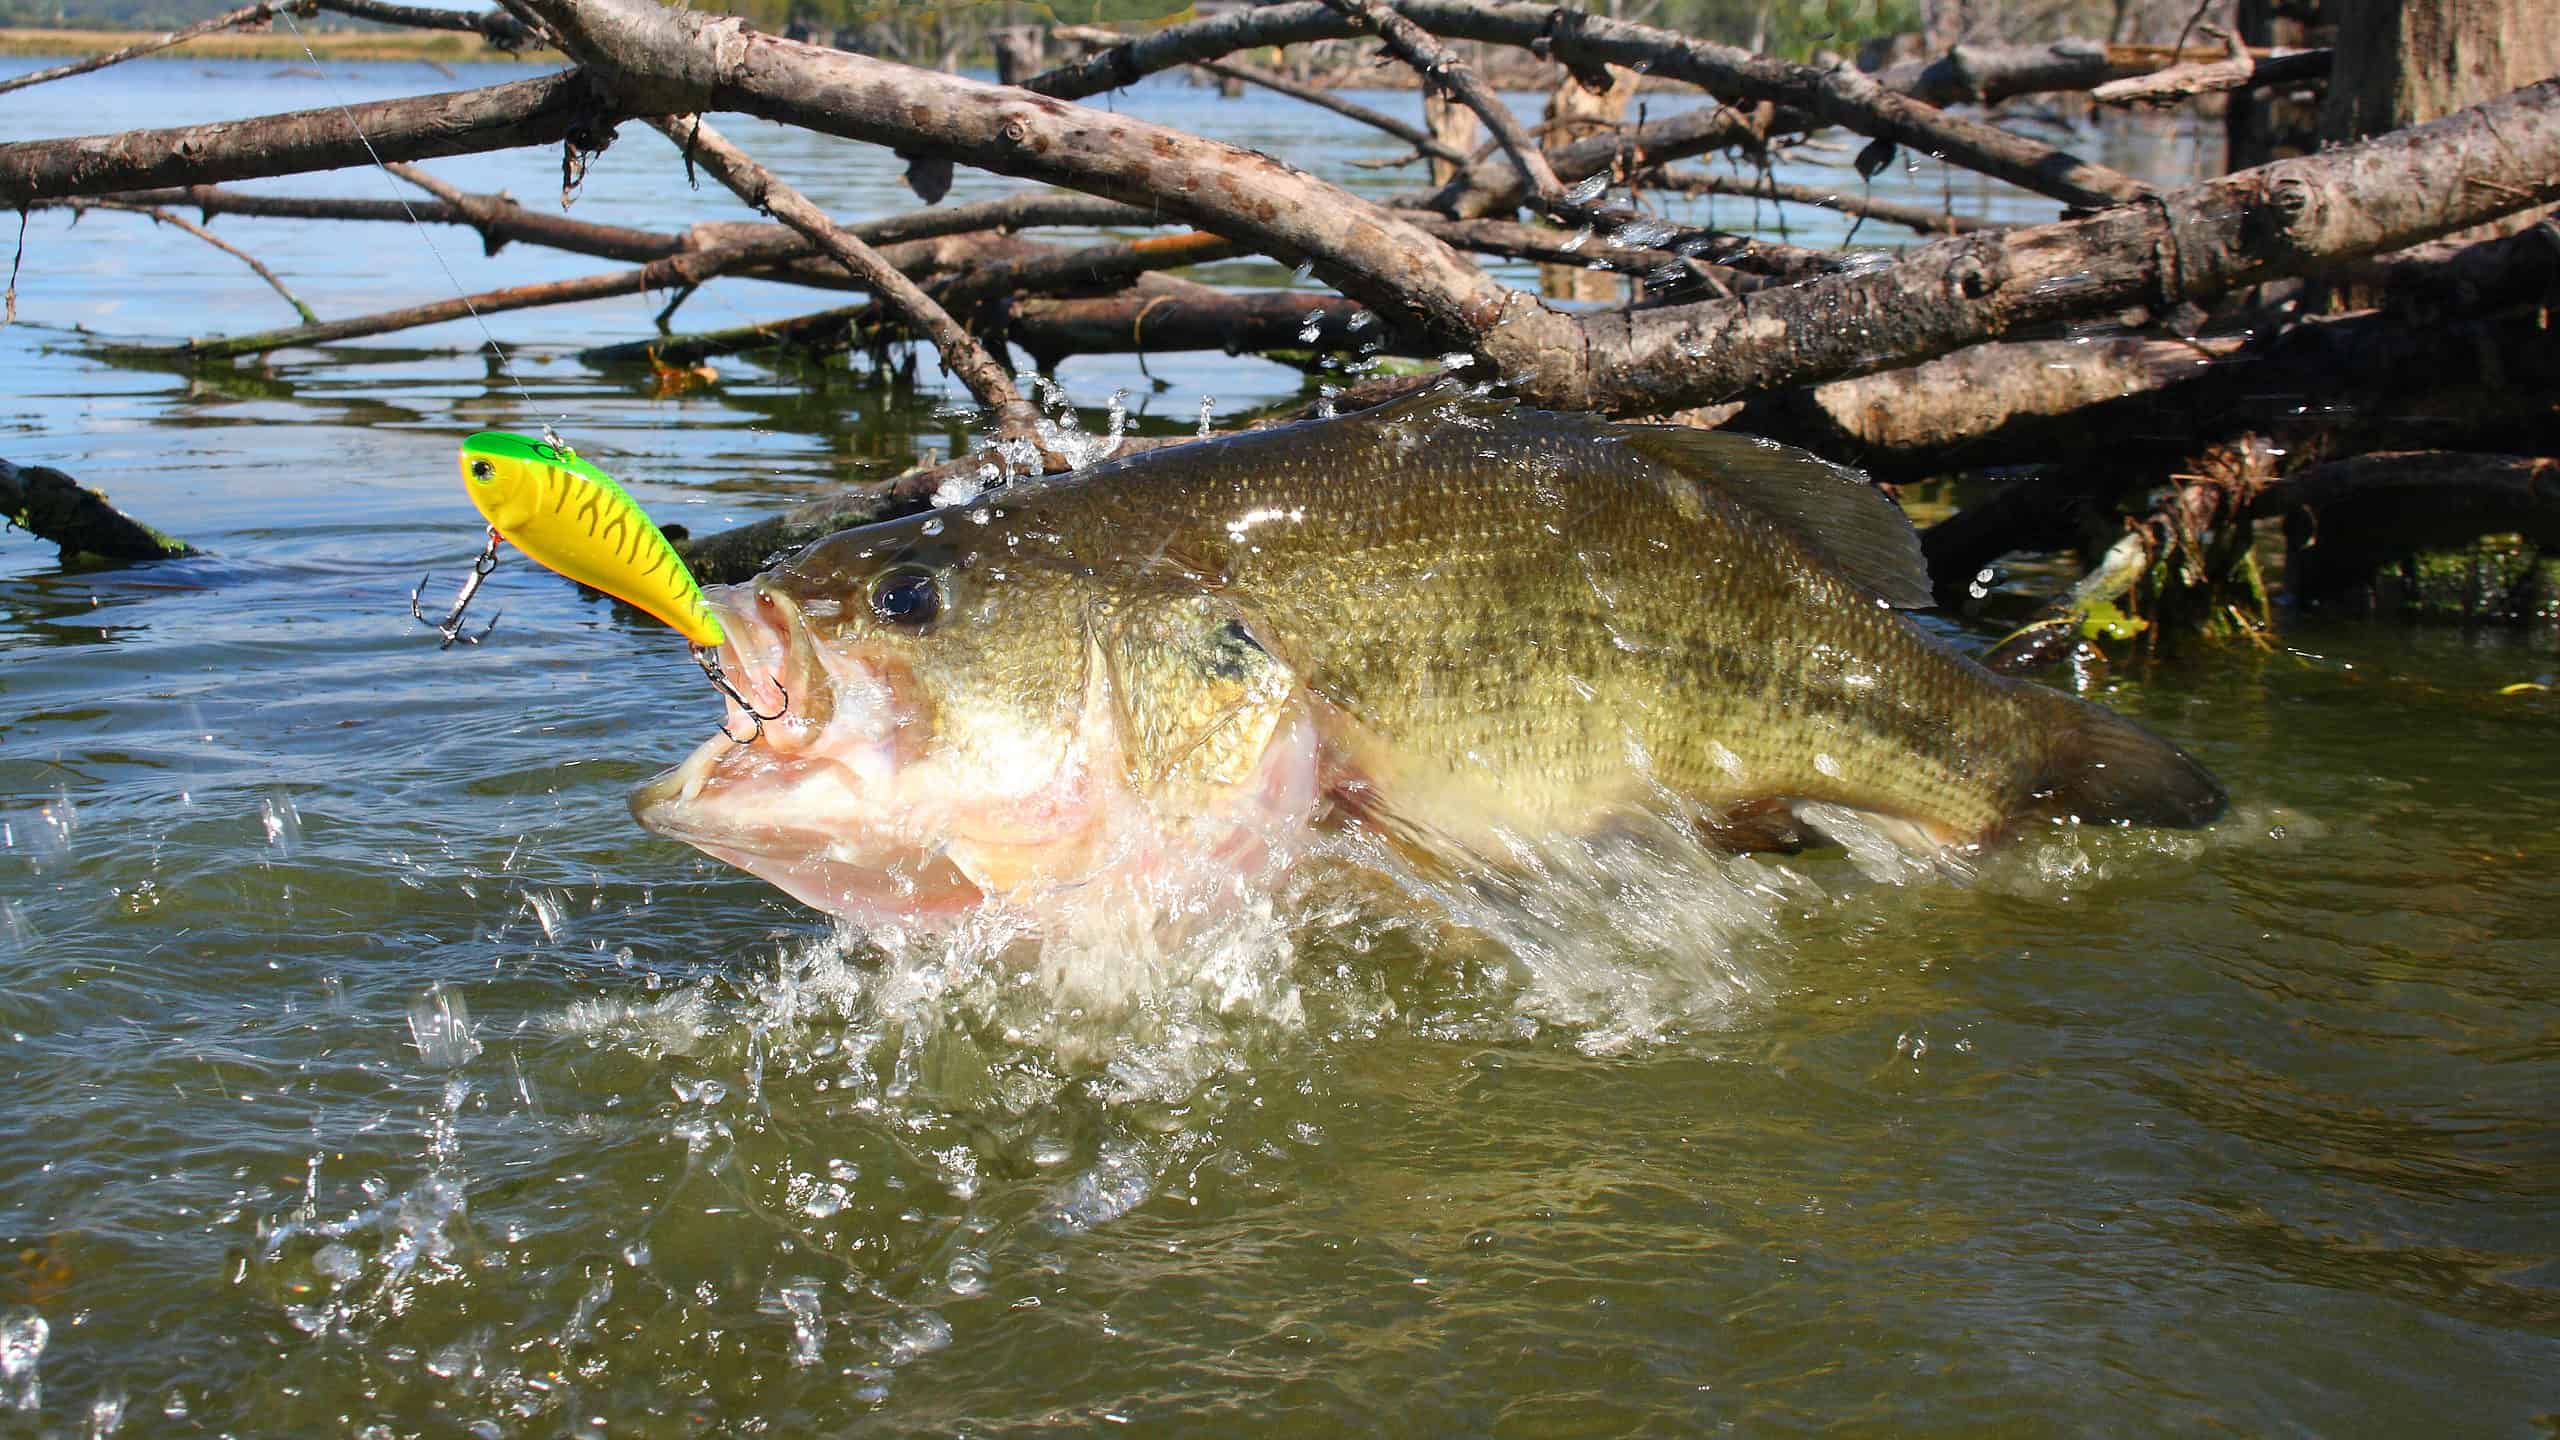 Largemouth bass are often found near lay downs or other structures where they can ambush their prey.